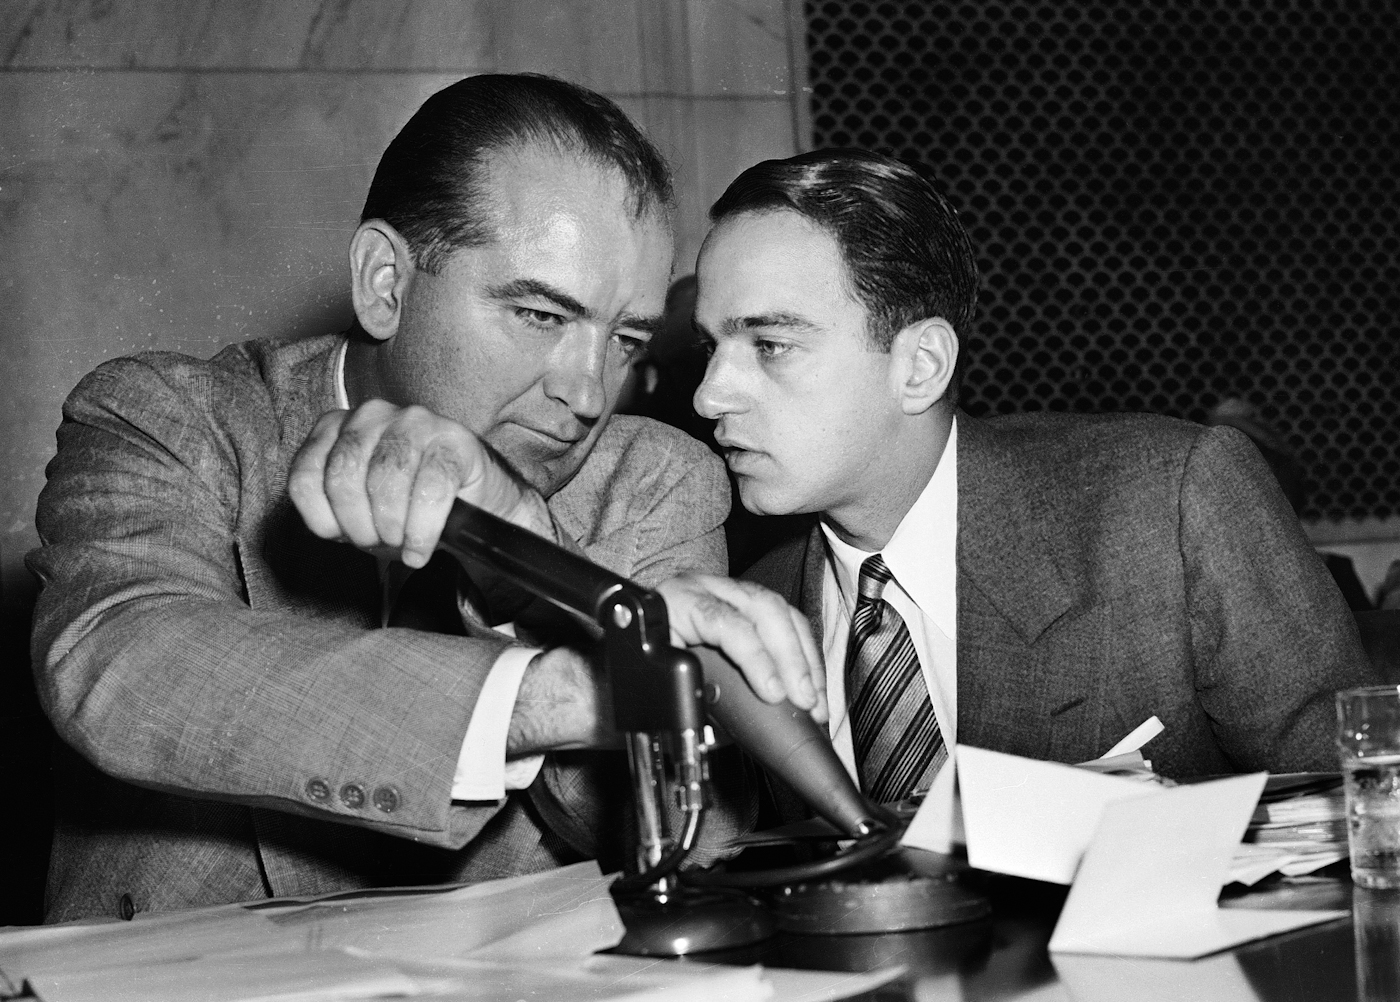 McCarthy covers the mic while having a whispered discussion with Cohn during a 1954 committee hearing. Photo | AP